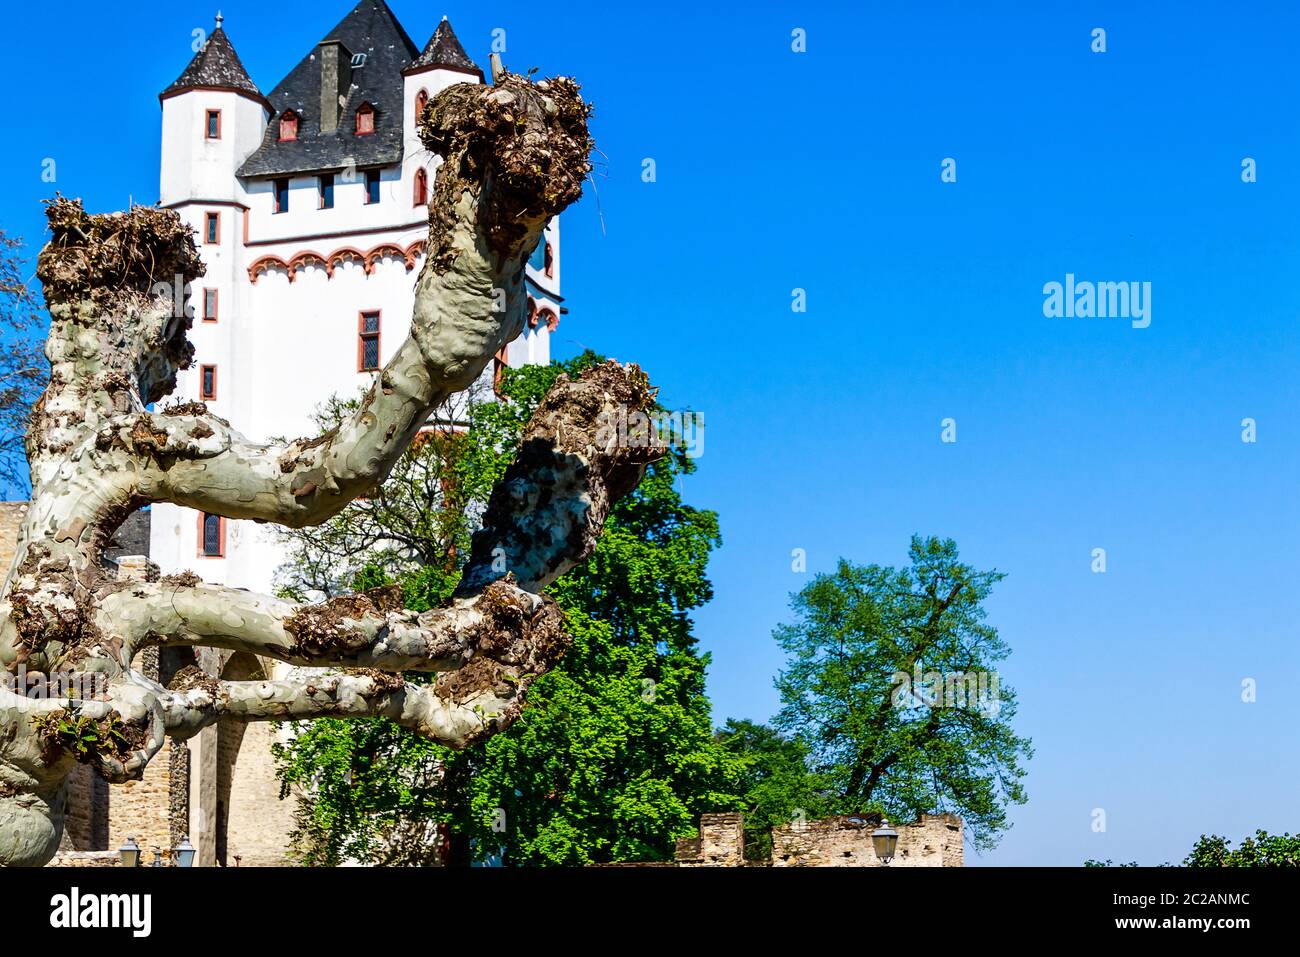 Electoral castle in Eltville in Rheingau, a district of the sparkling wine, wine and rose town of Eltville on the Rhine in the Rheingau-Taunus in Hesse, Germany Stock Photo